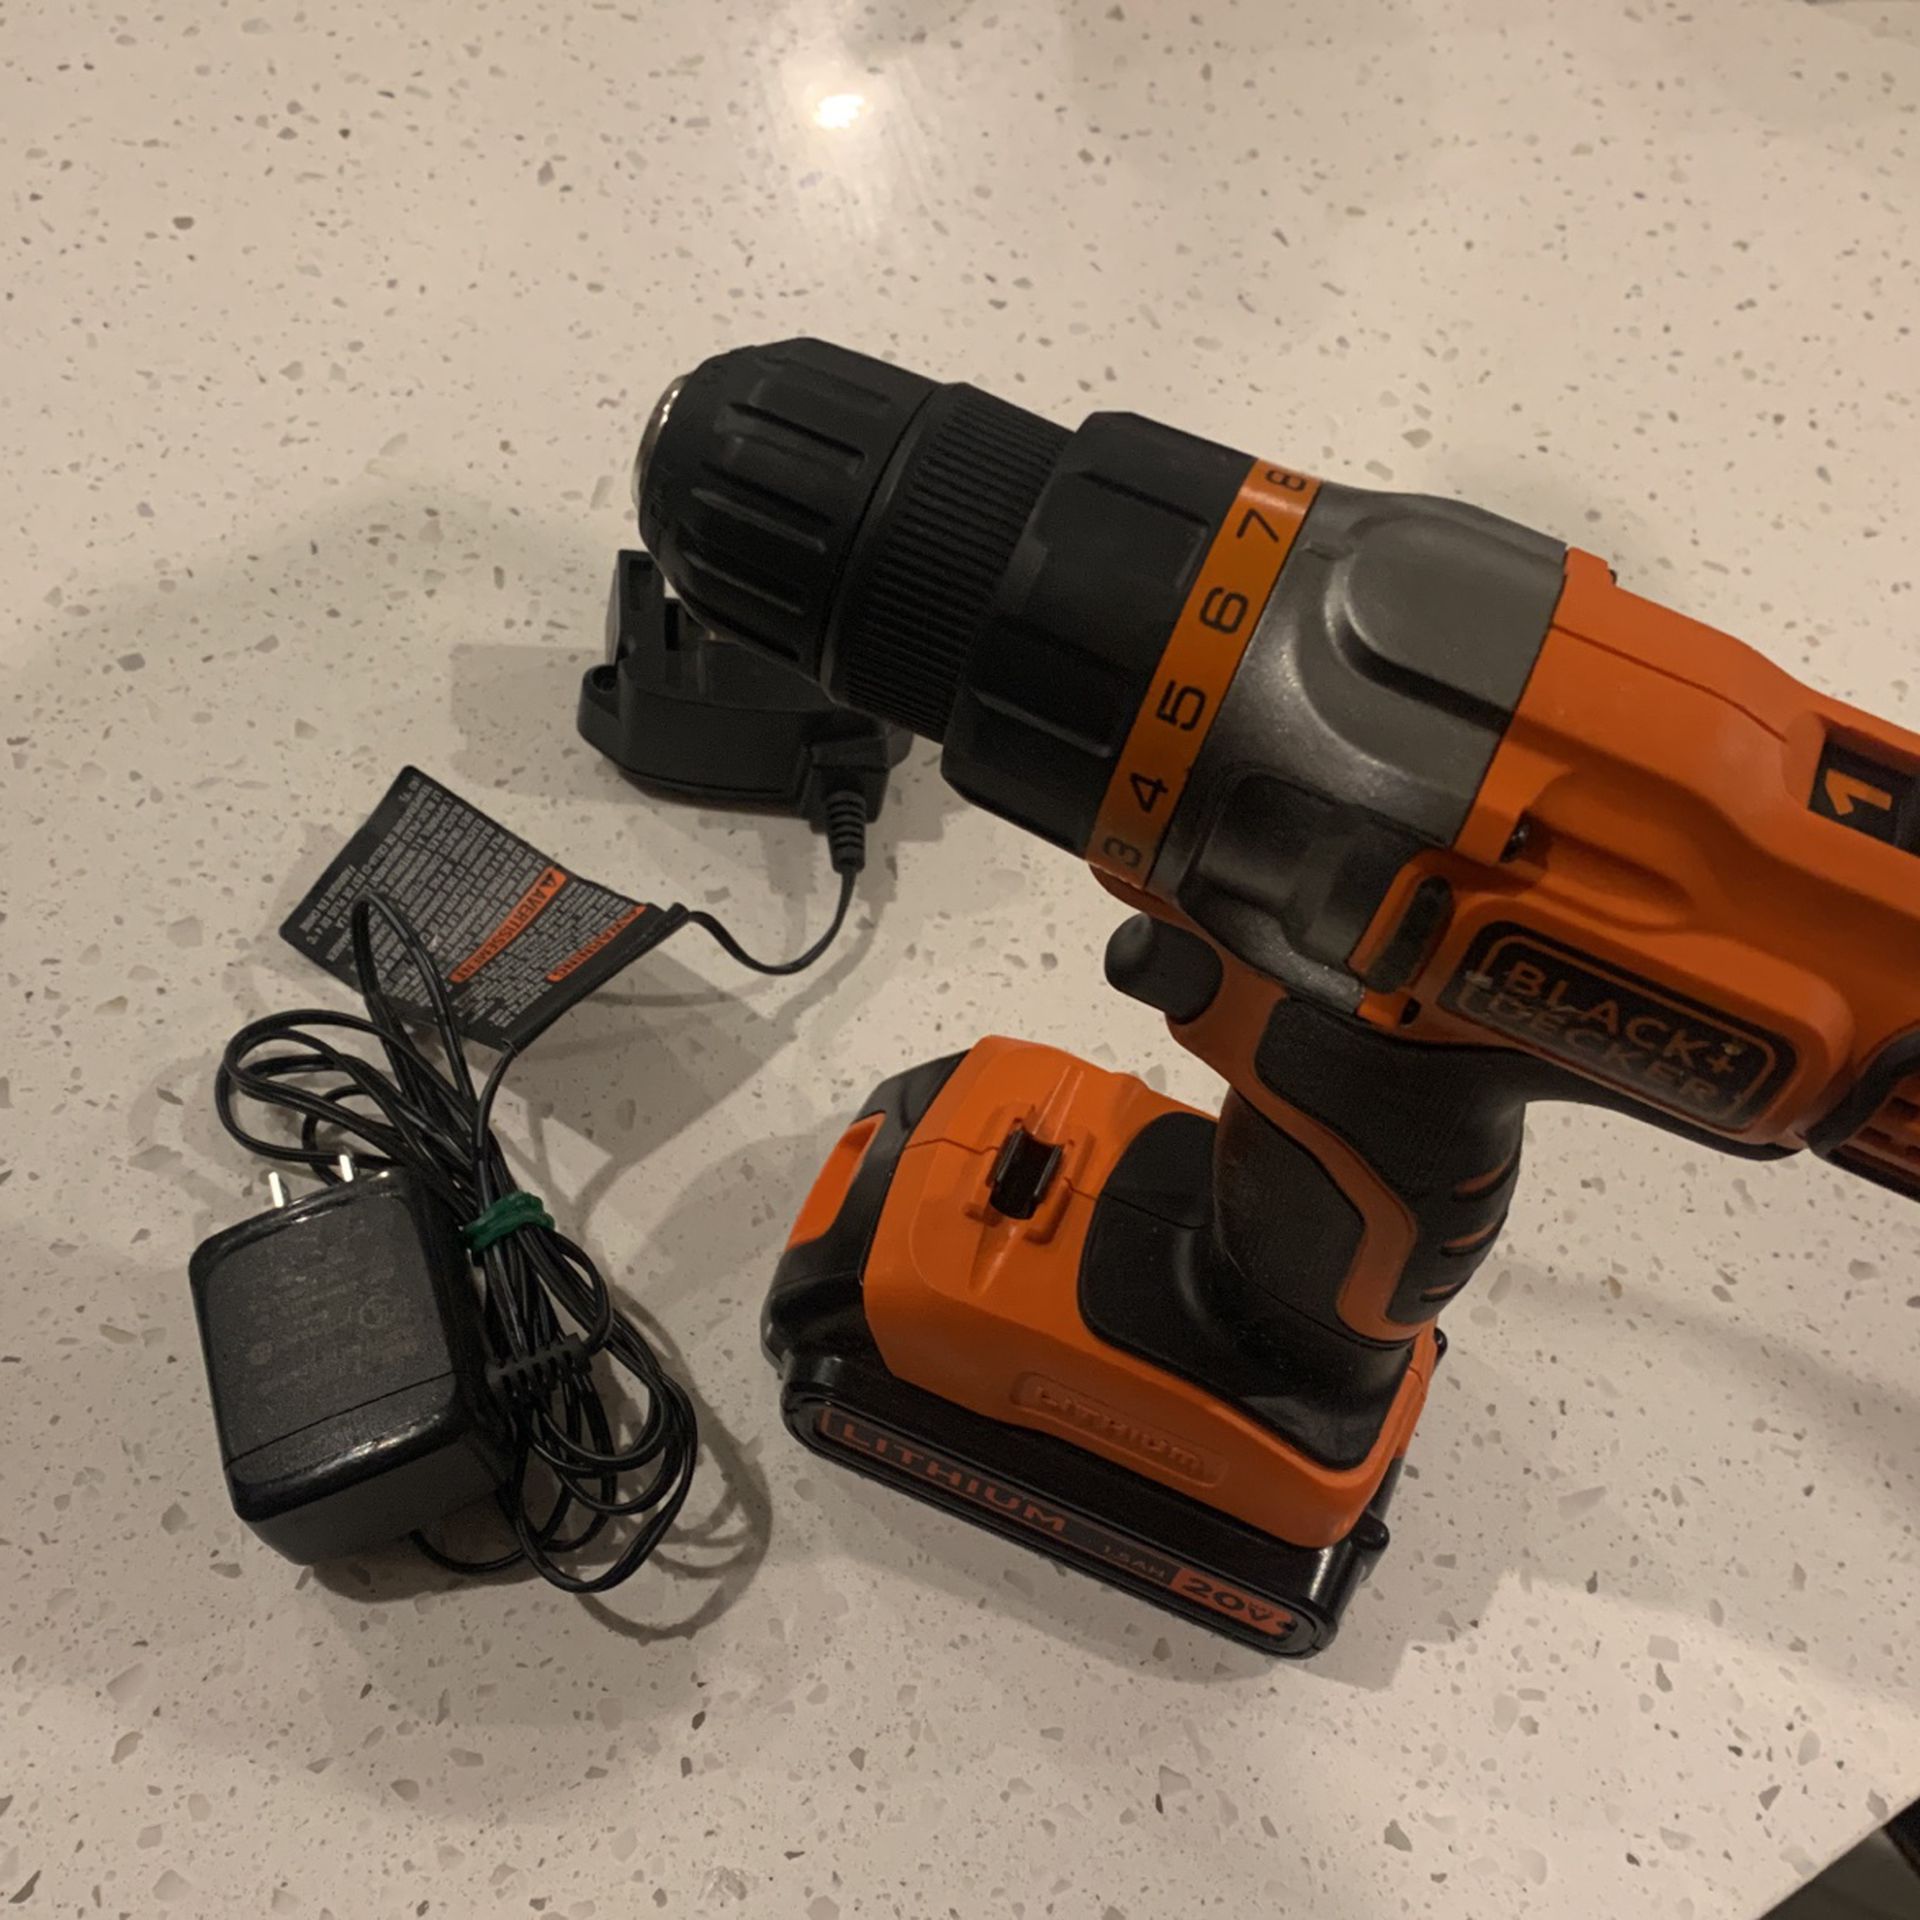 Black & Decker Cordless Drill / Driver + Reciprocating Saw - NEW for Sale  in Kingston, MA - OfferUp